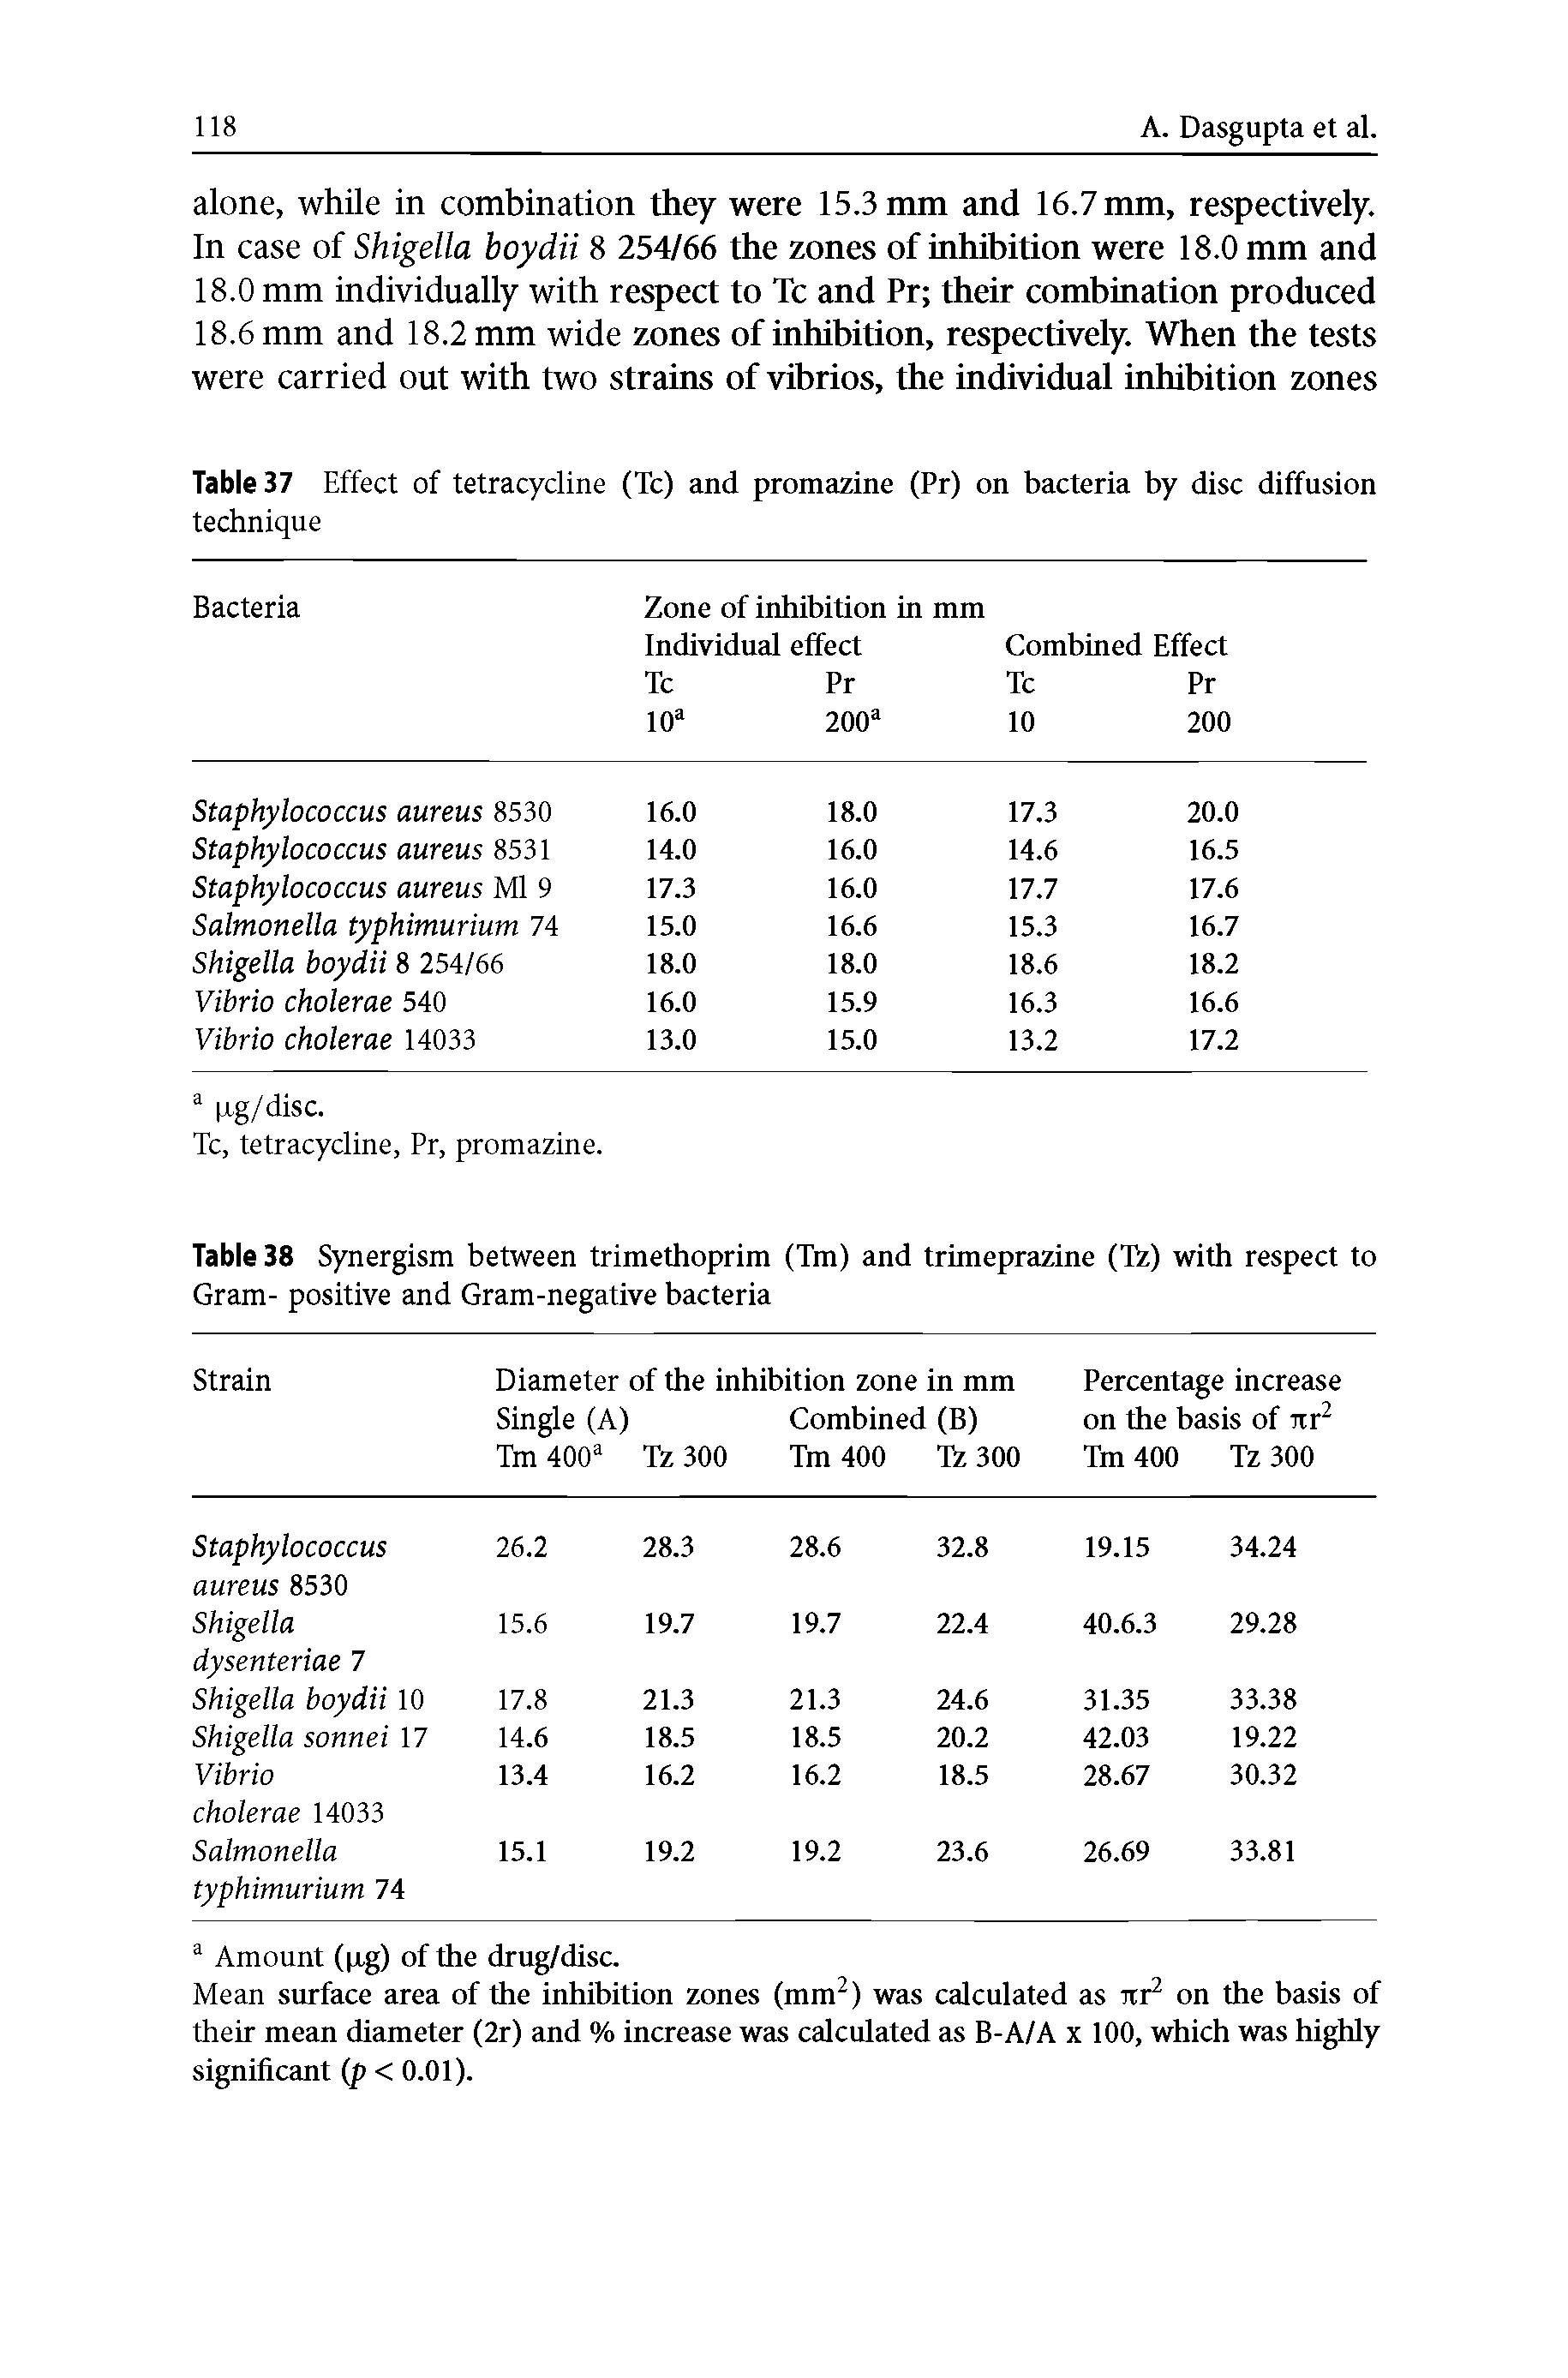 Table 37 Effect of tetracycline (Tc) and promazine (Pr) on bacteria by disc diffusion technique...